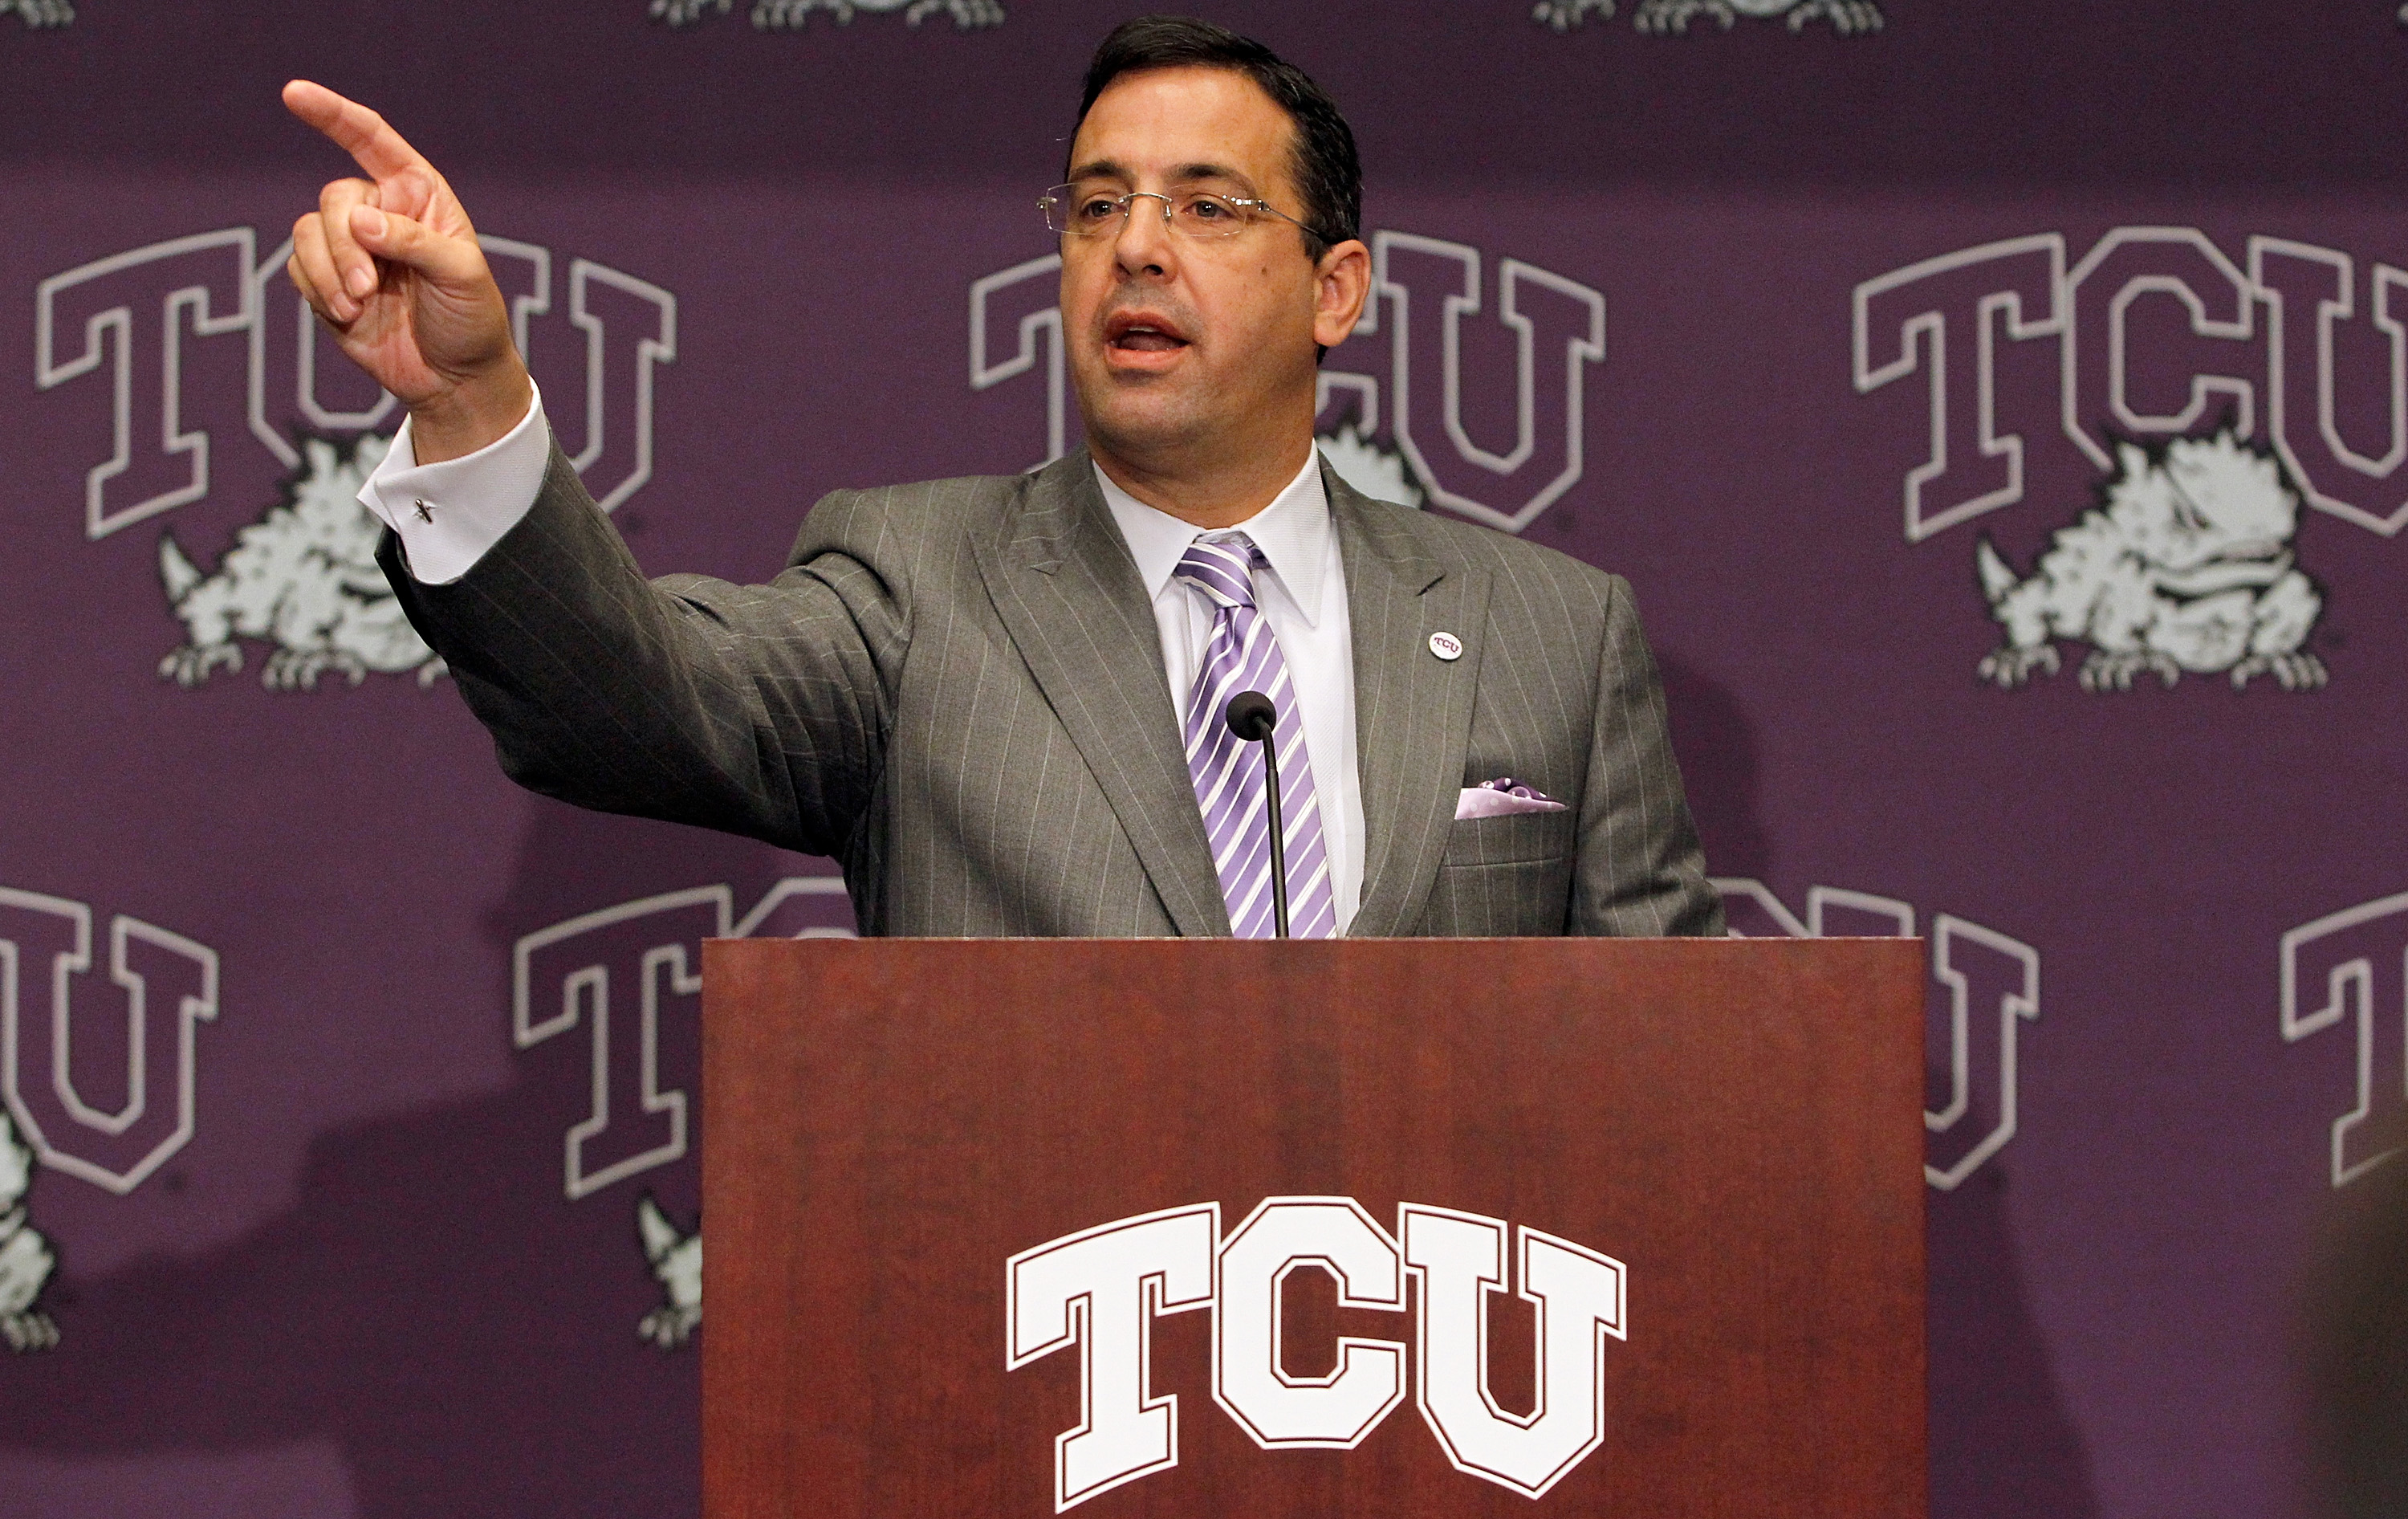 TCU Accepts Invitation to Join Big East Conference - Press Conference